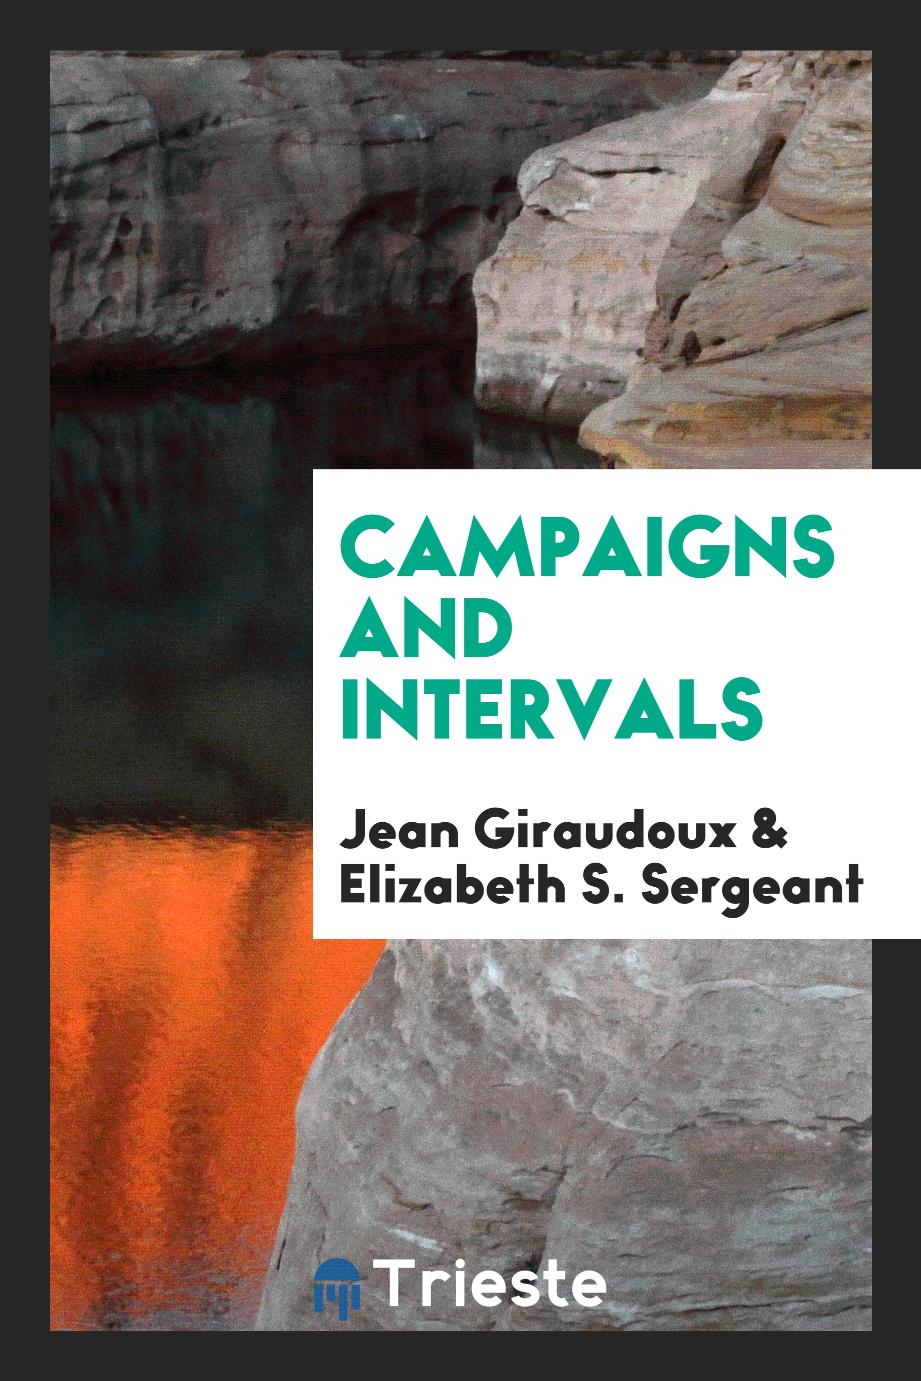 Campaigns and intervals